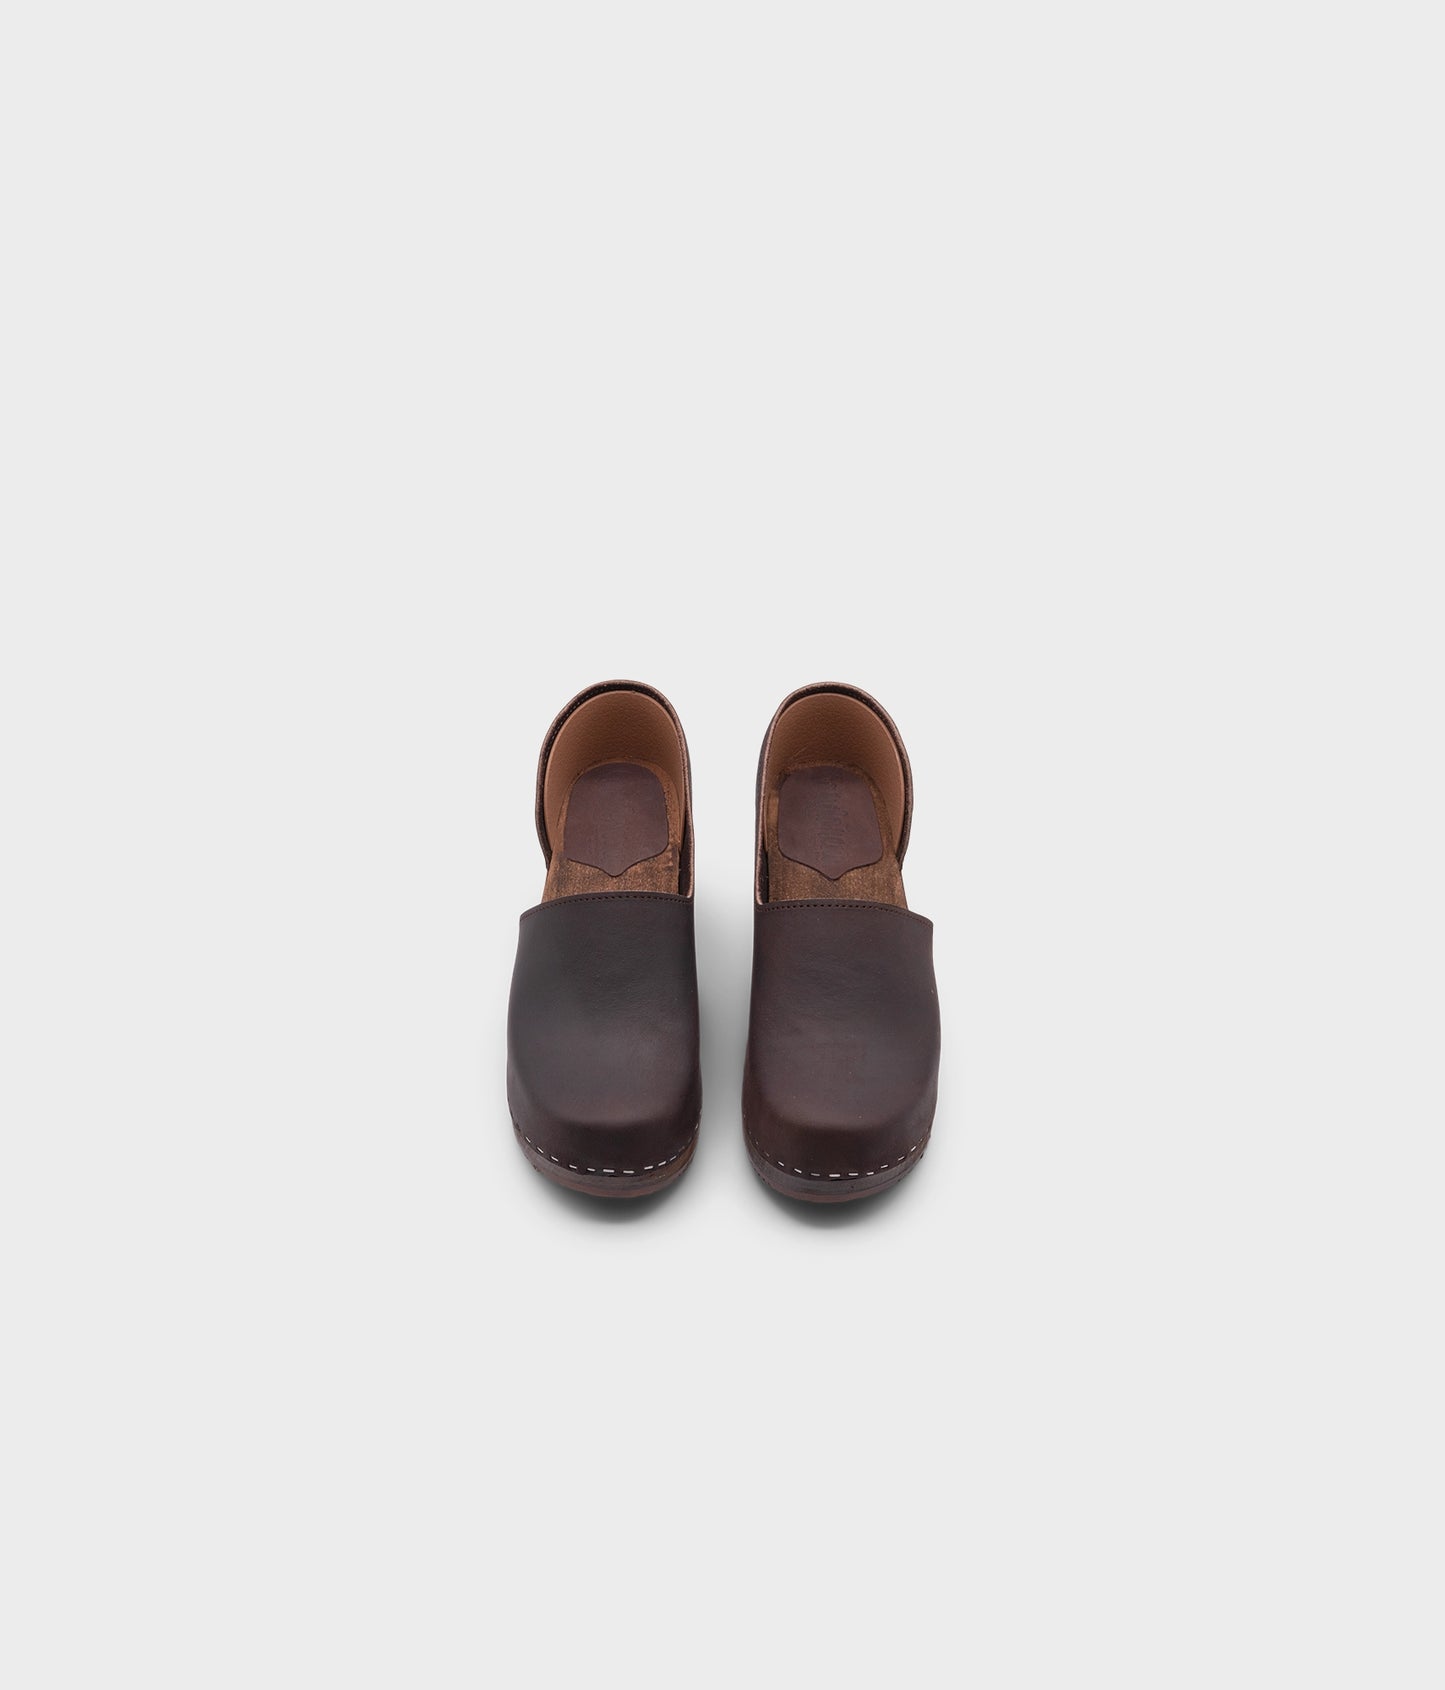 high heeled closed-back clogs in dark brown nubuck leather stapled on a dark wooden base